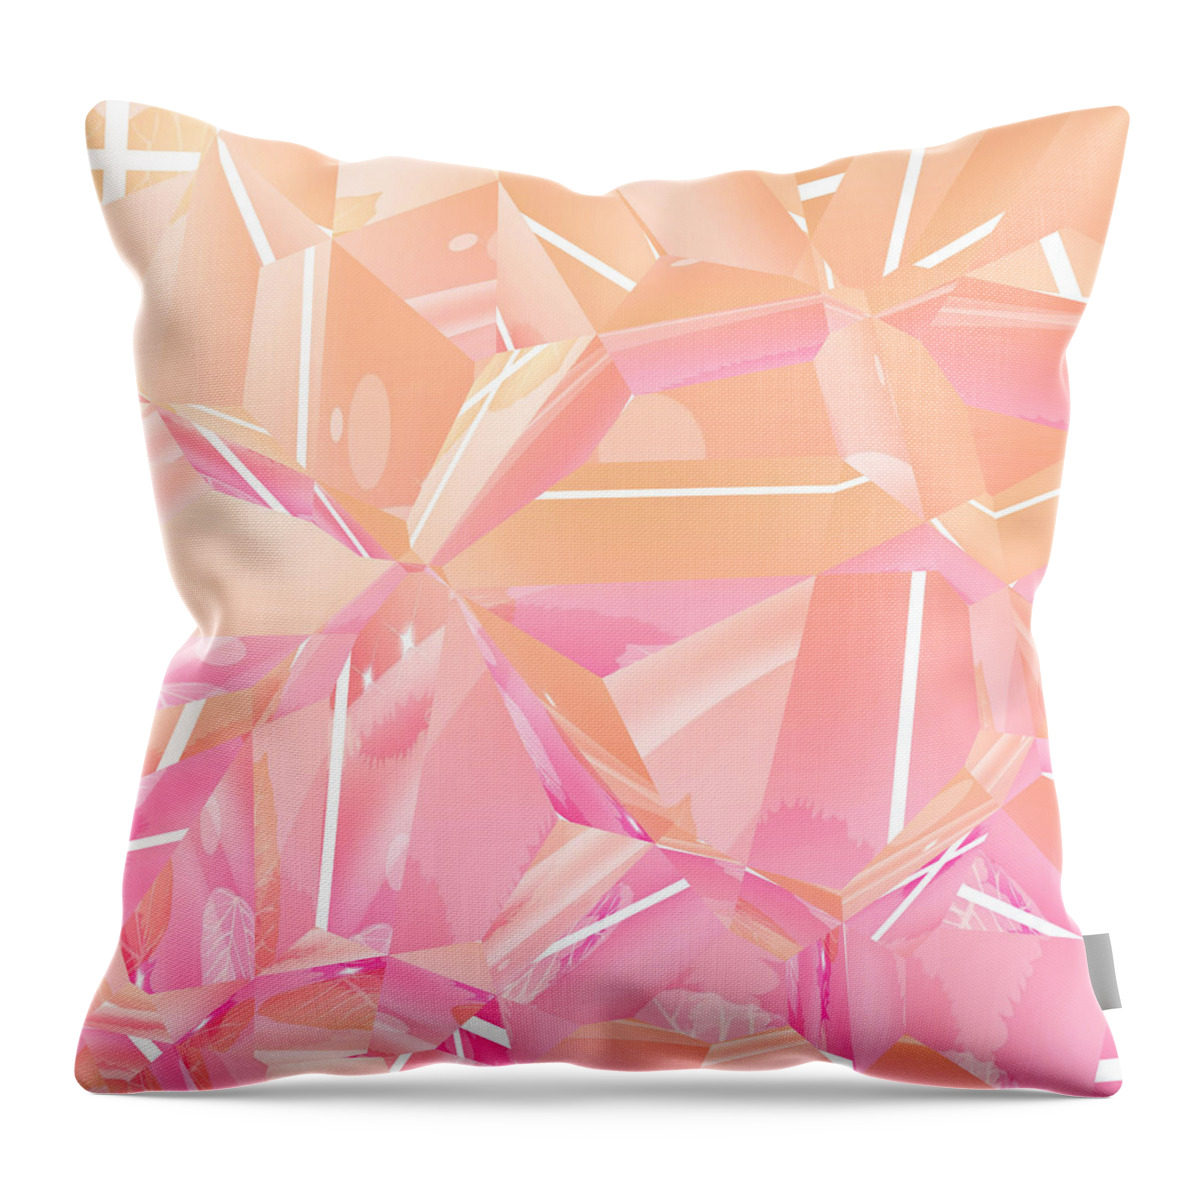 Pink Abstract Throw Pillow featuring the digital art Pink Serenity by Kathy Kelly